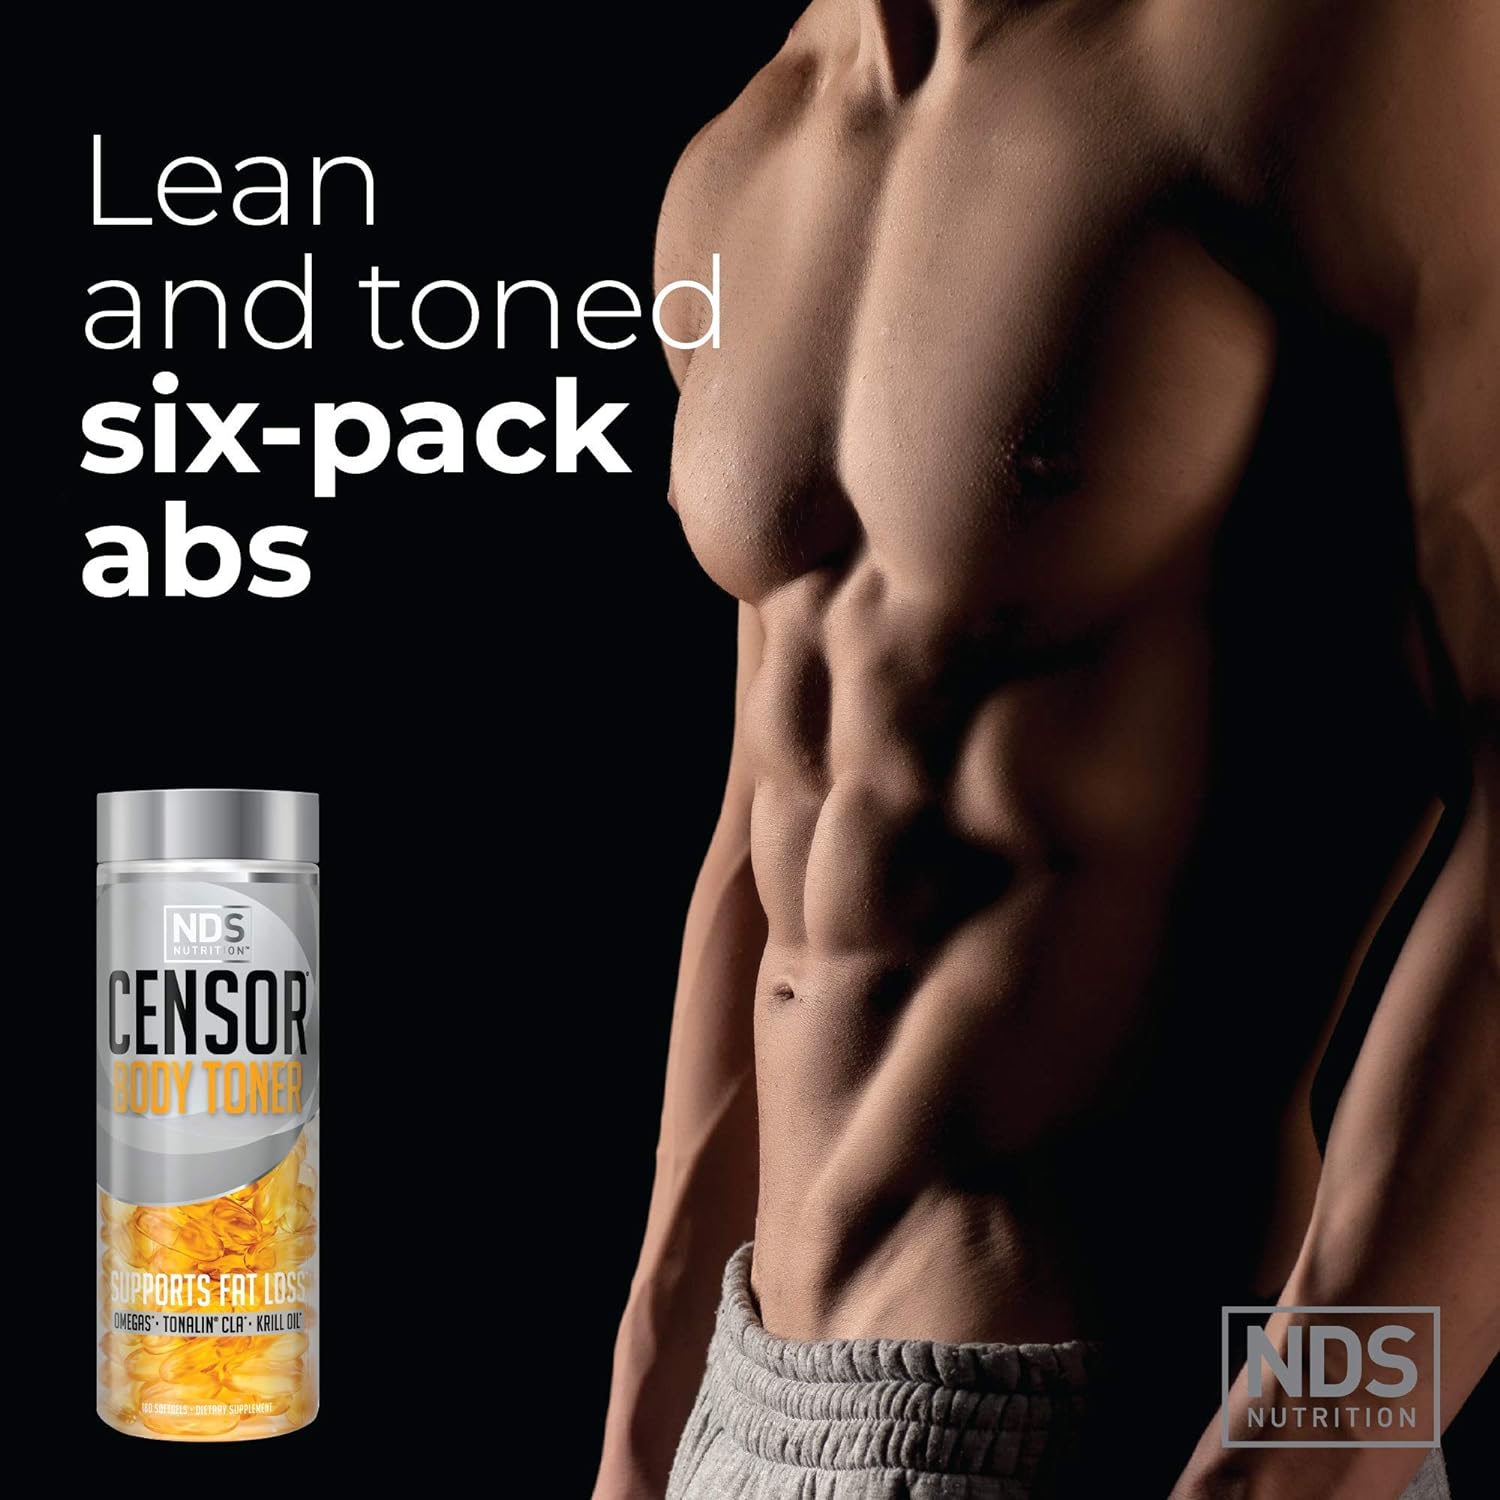 NDS Censor with CLA - Supports Healthy Fat Loss